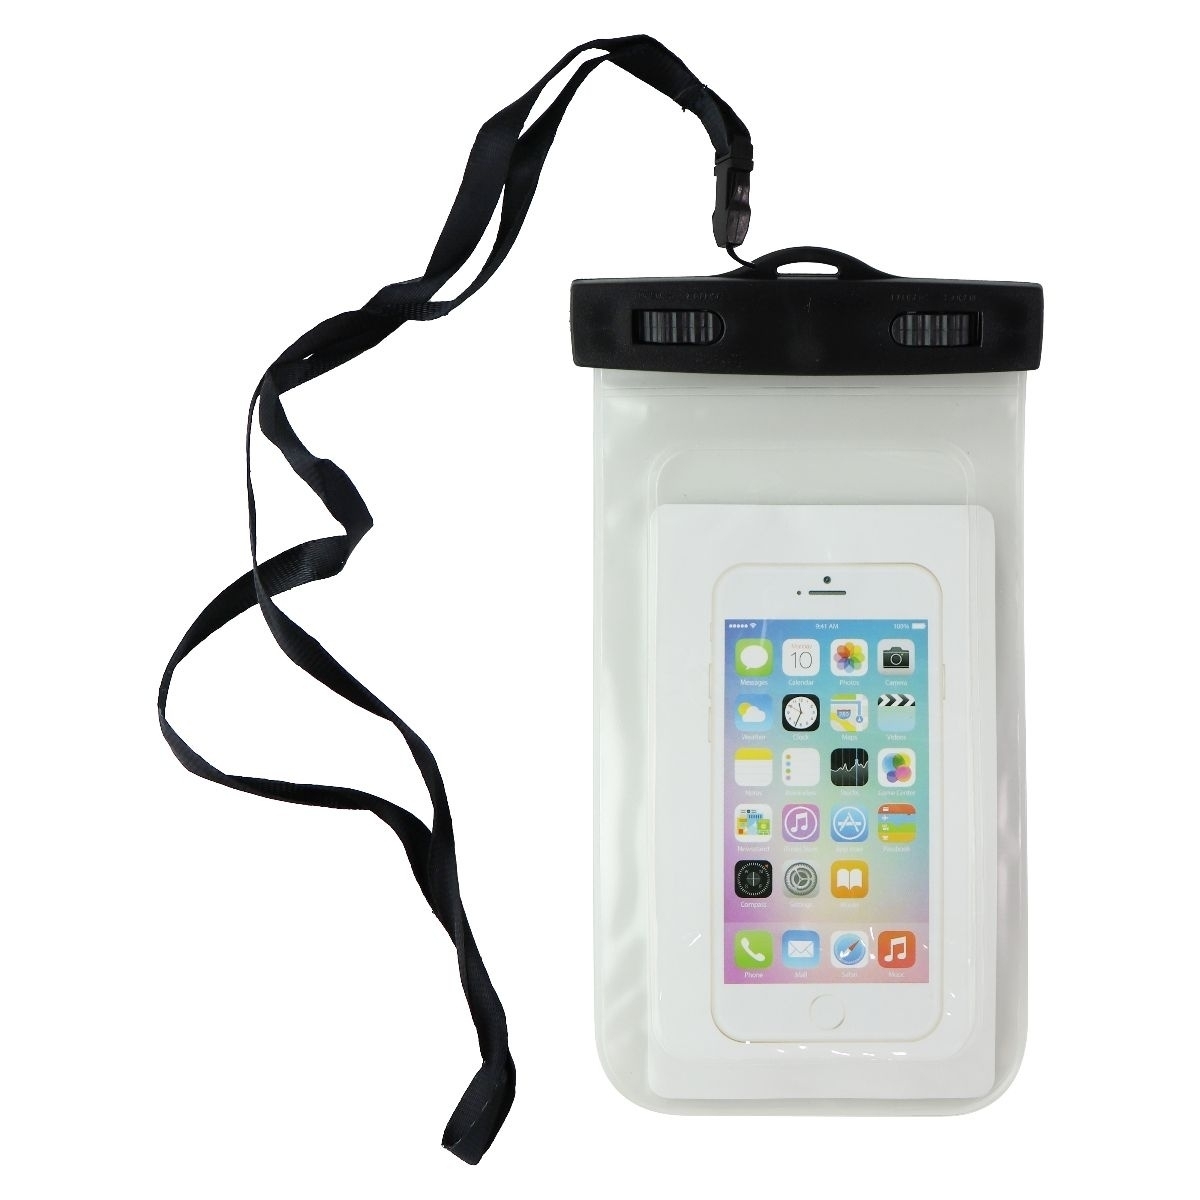 Universal Water Resistant Pouch For Smartphones With Carrying Cord - Clear